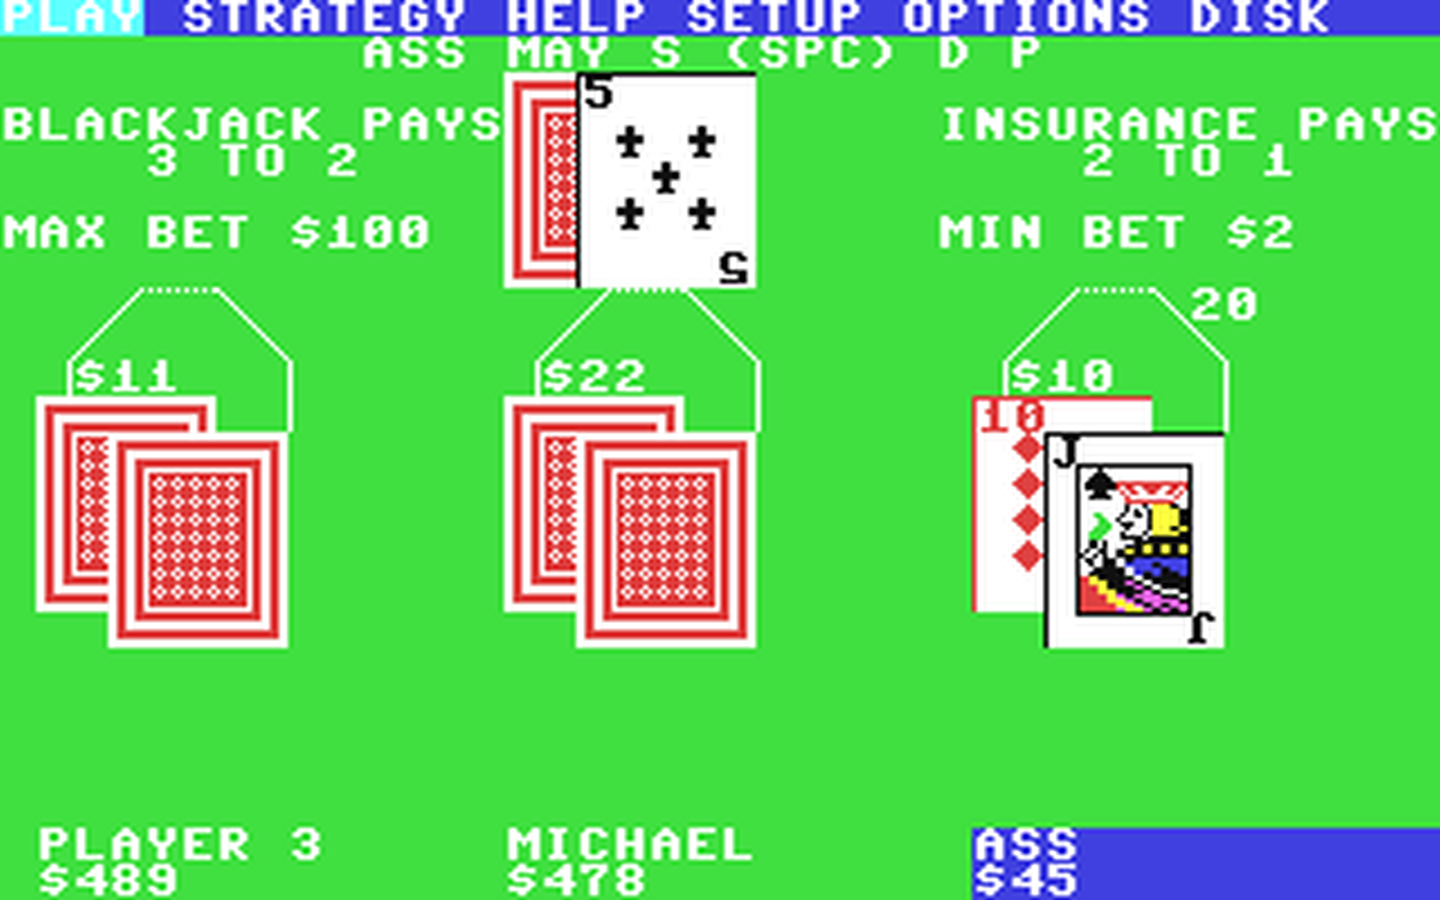 C64 GameBase BlackJack_Academy Microillusions 1987